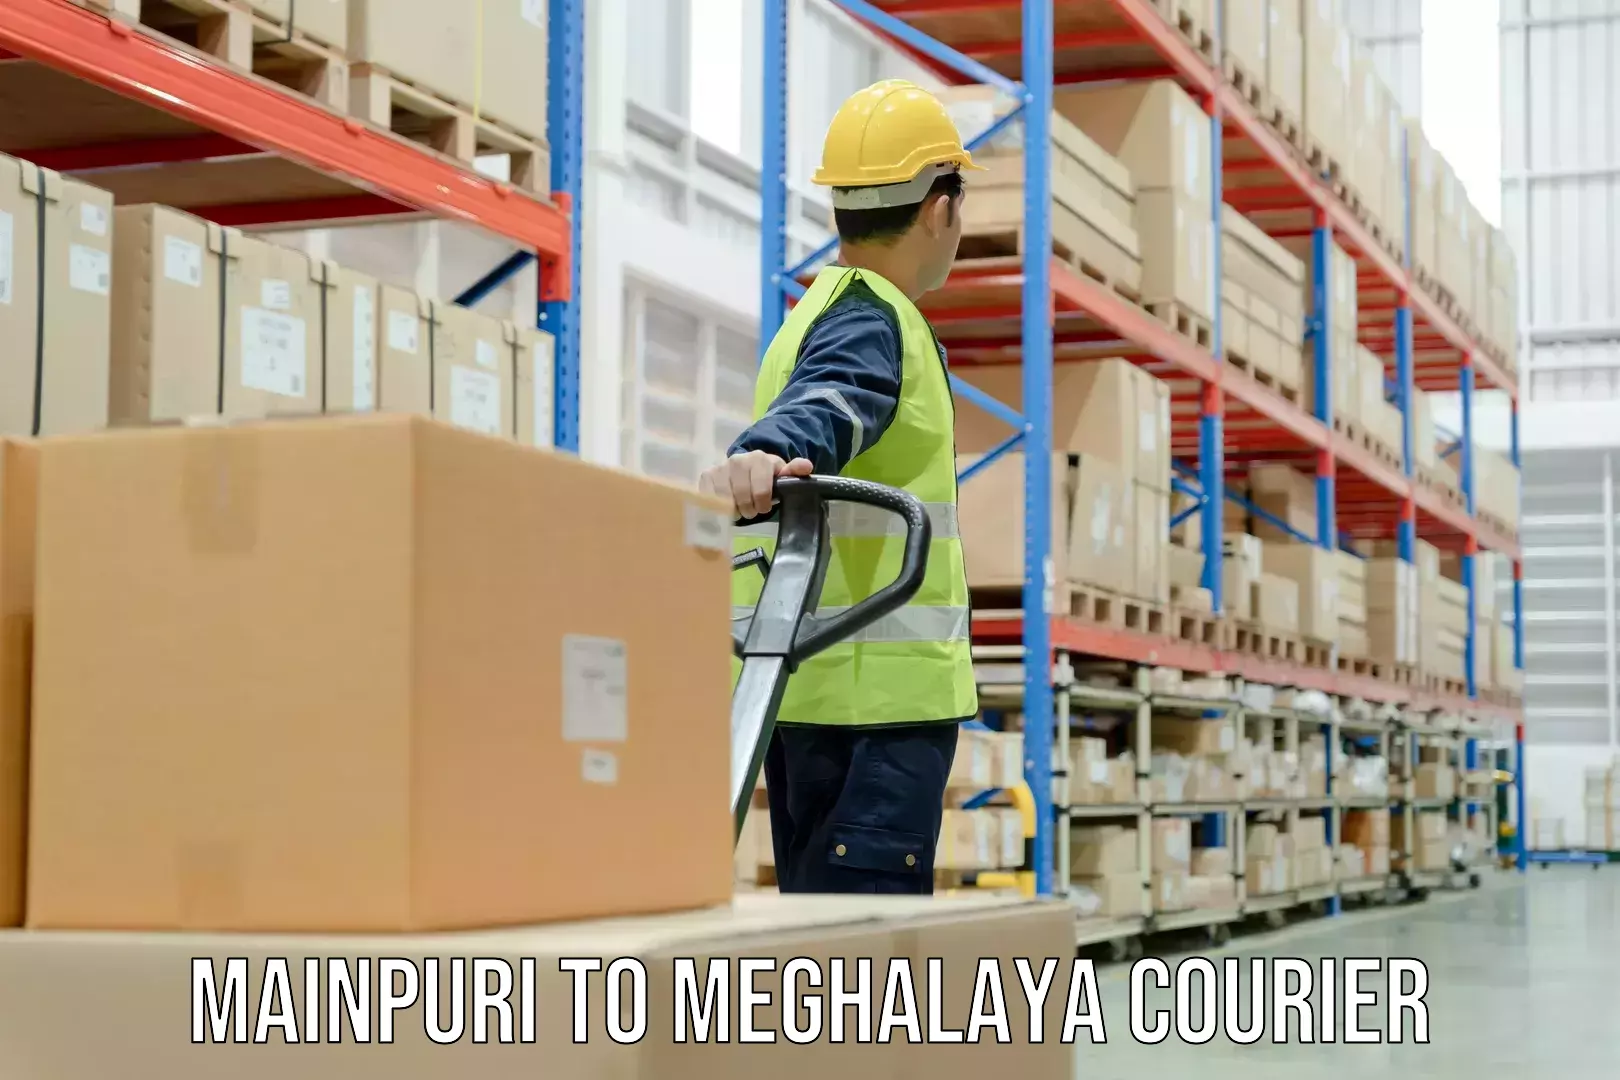 Round-the-clock parcel delivery Mainpuri to Meghalaya